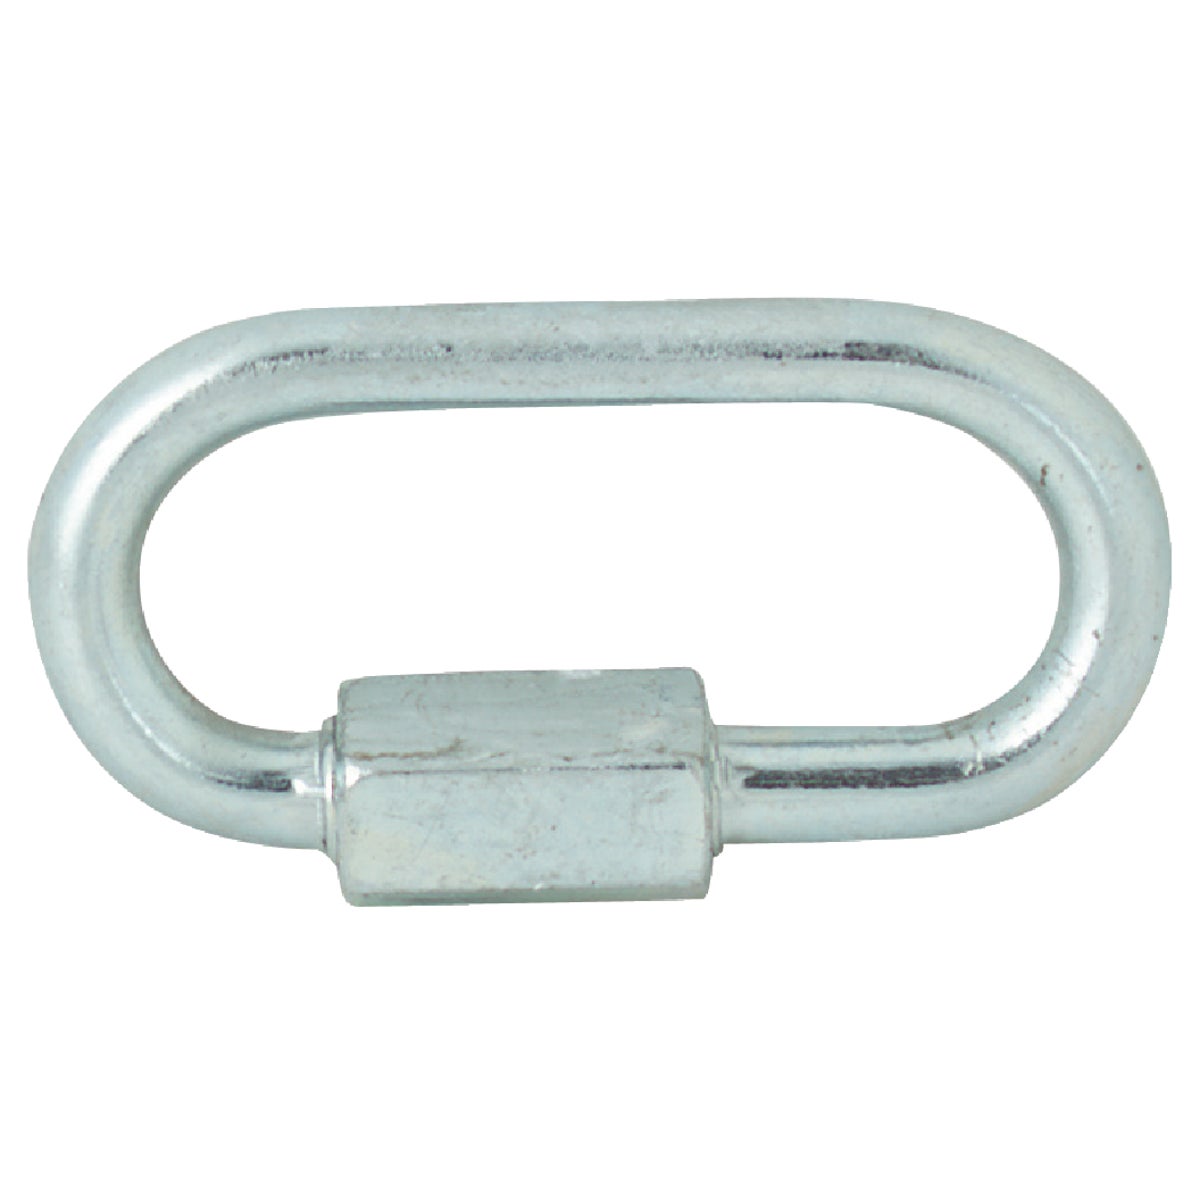 Campbell 1/8 In. Zinc-Plated Steel Quick Link